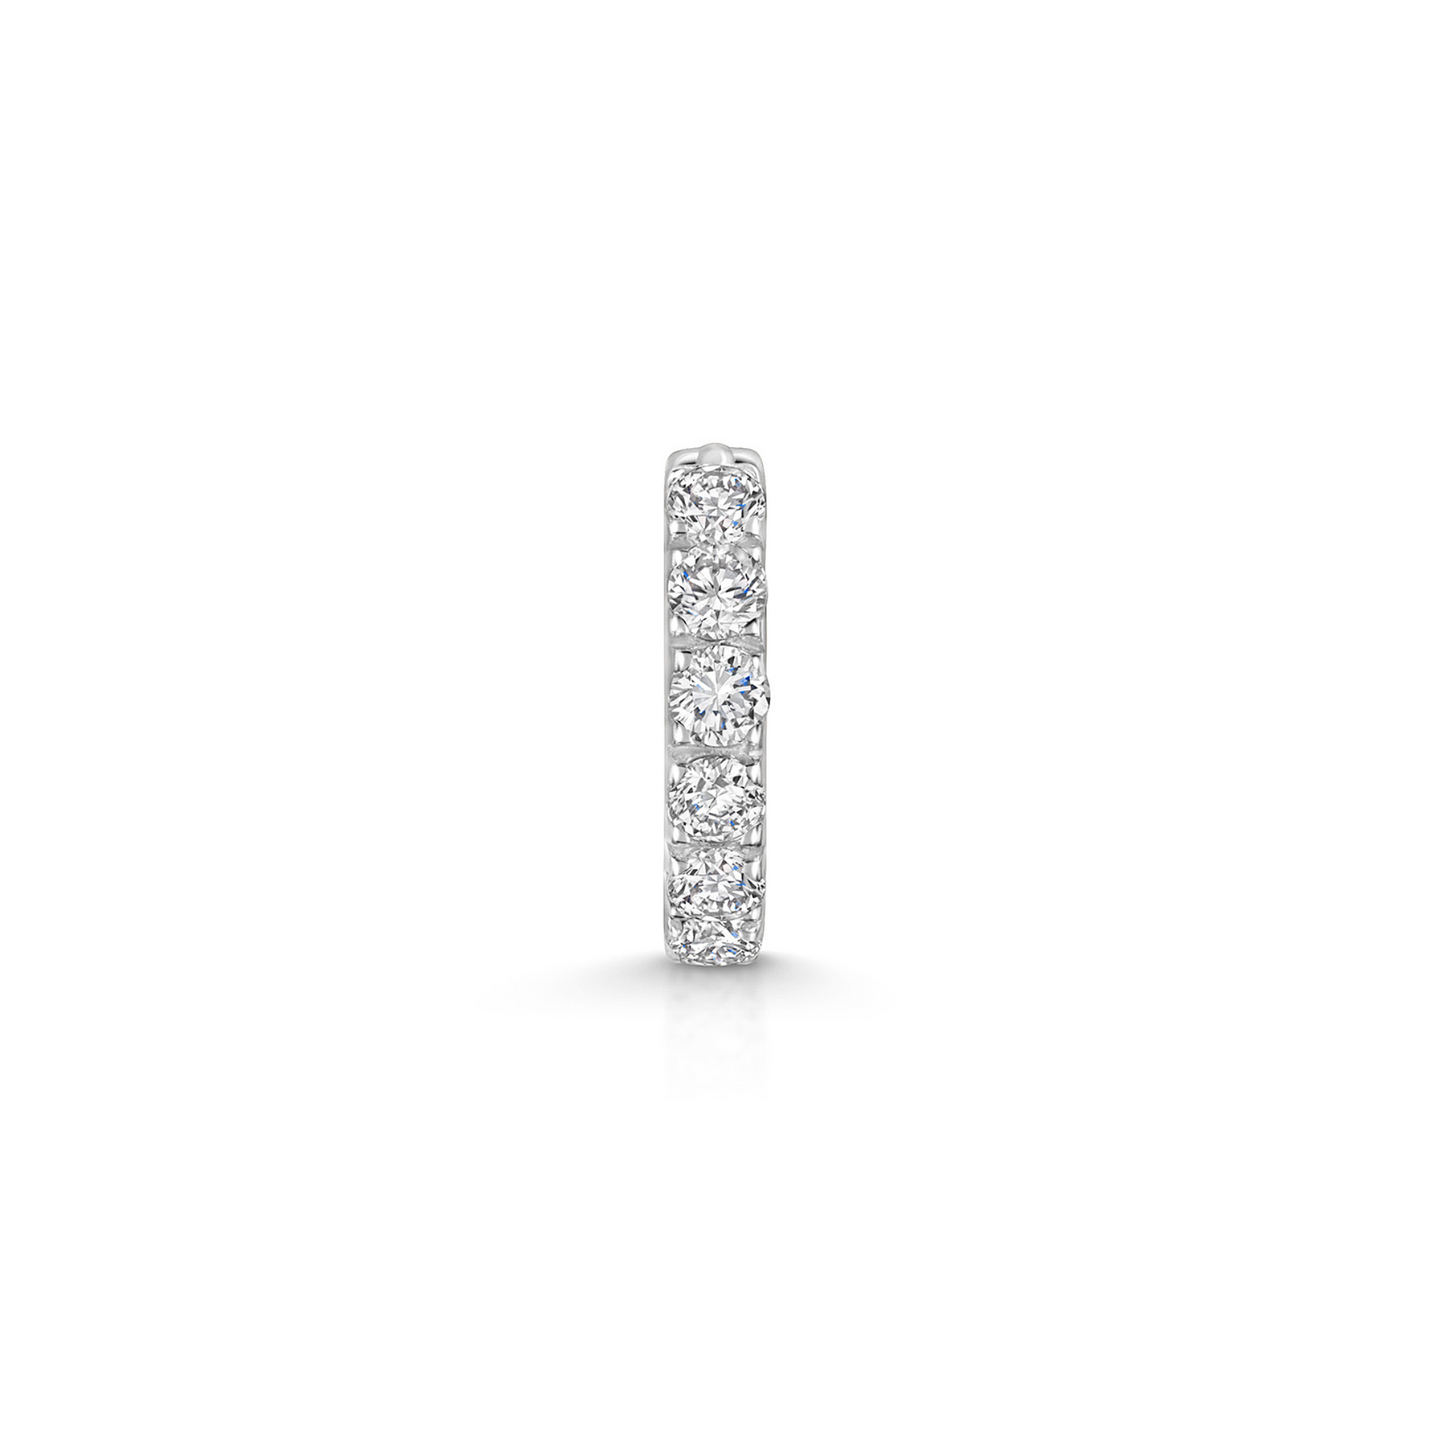 9k solid white gold 8mm simple crystal huggie earring